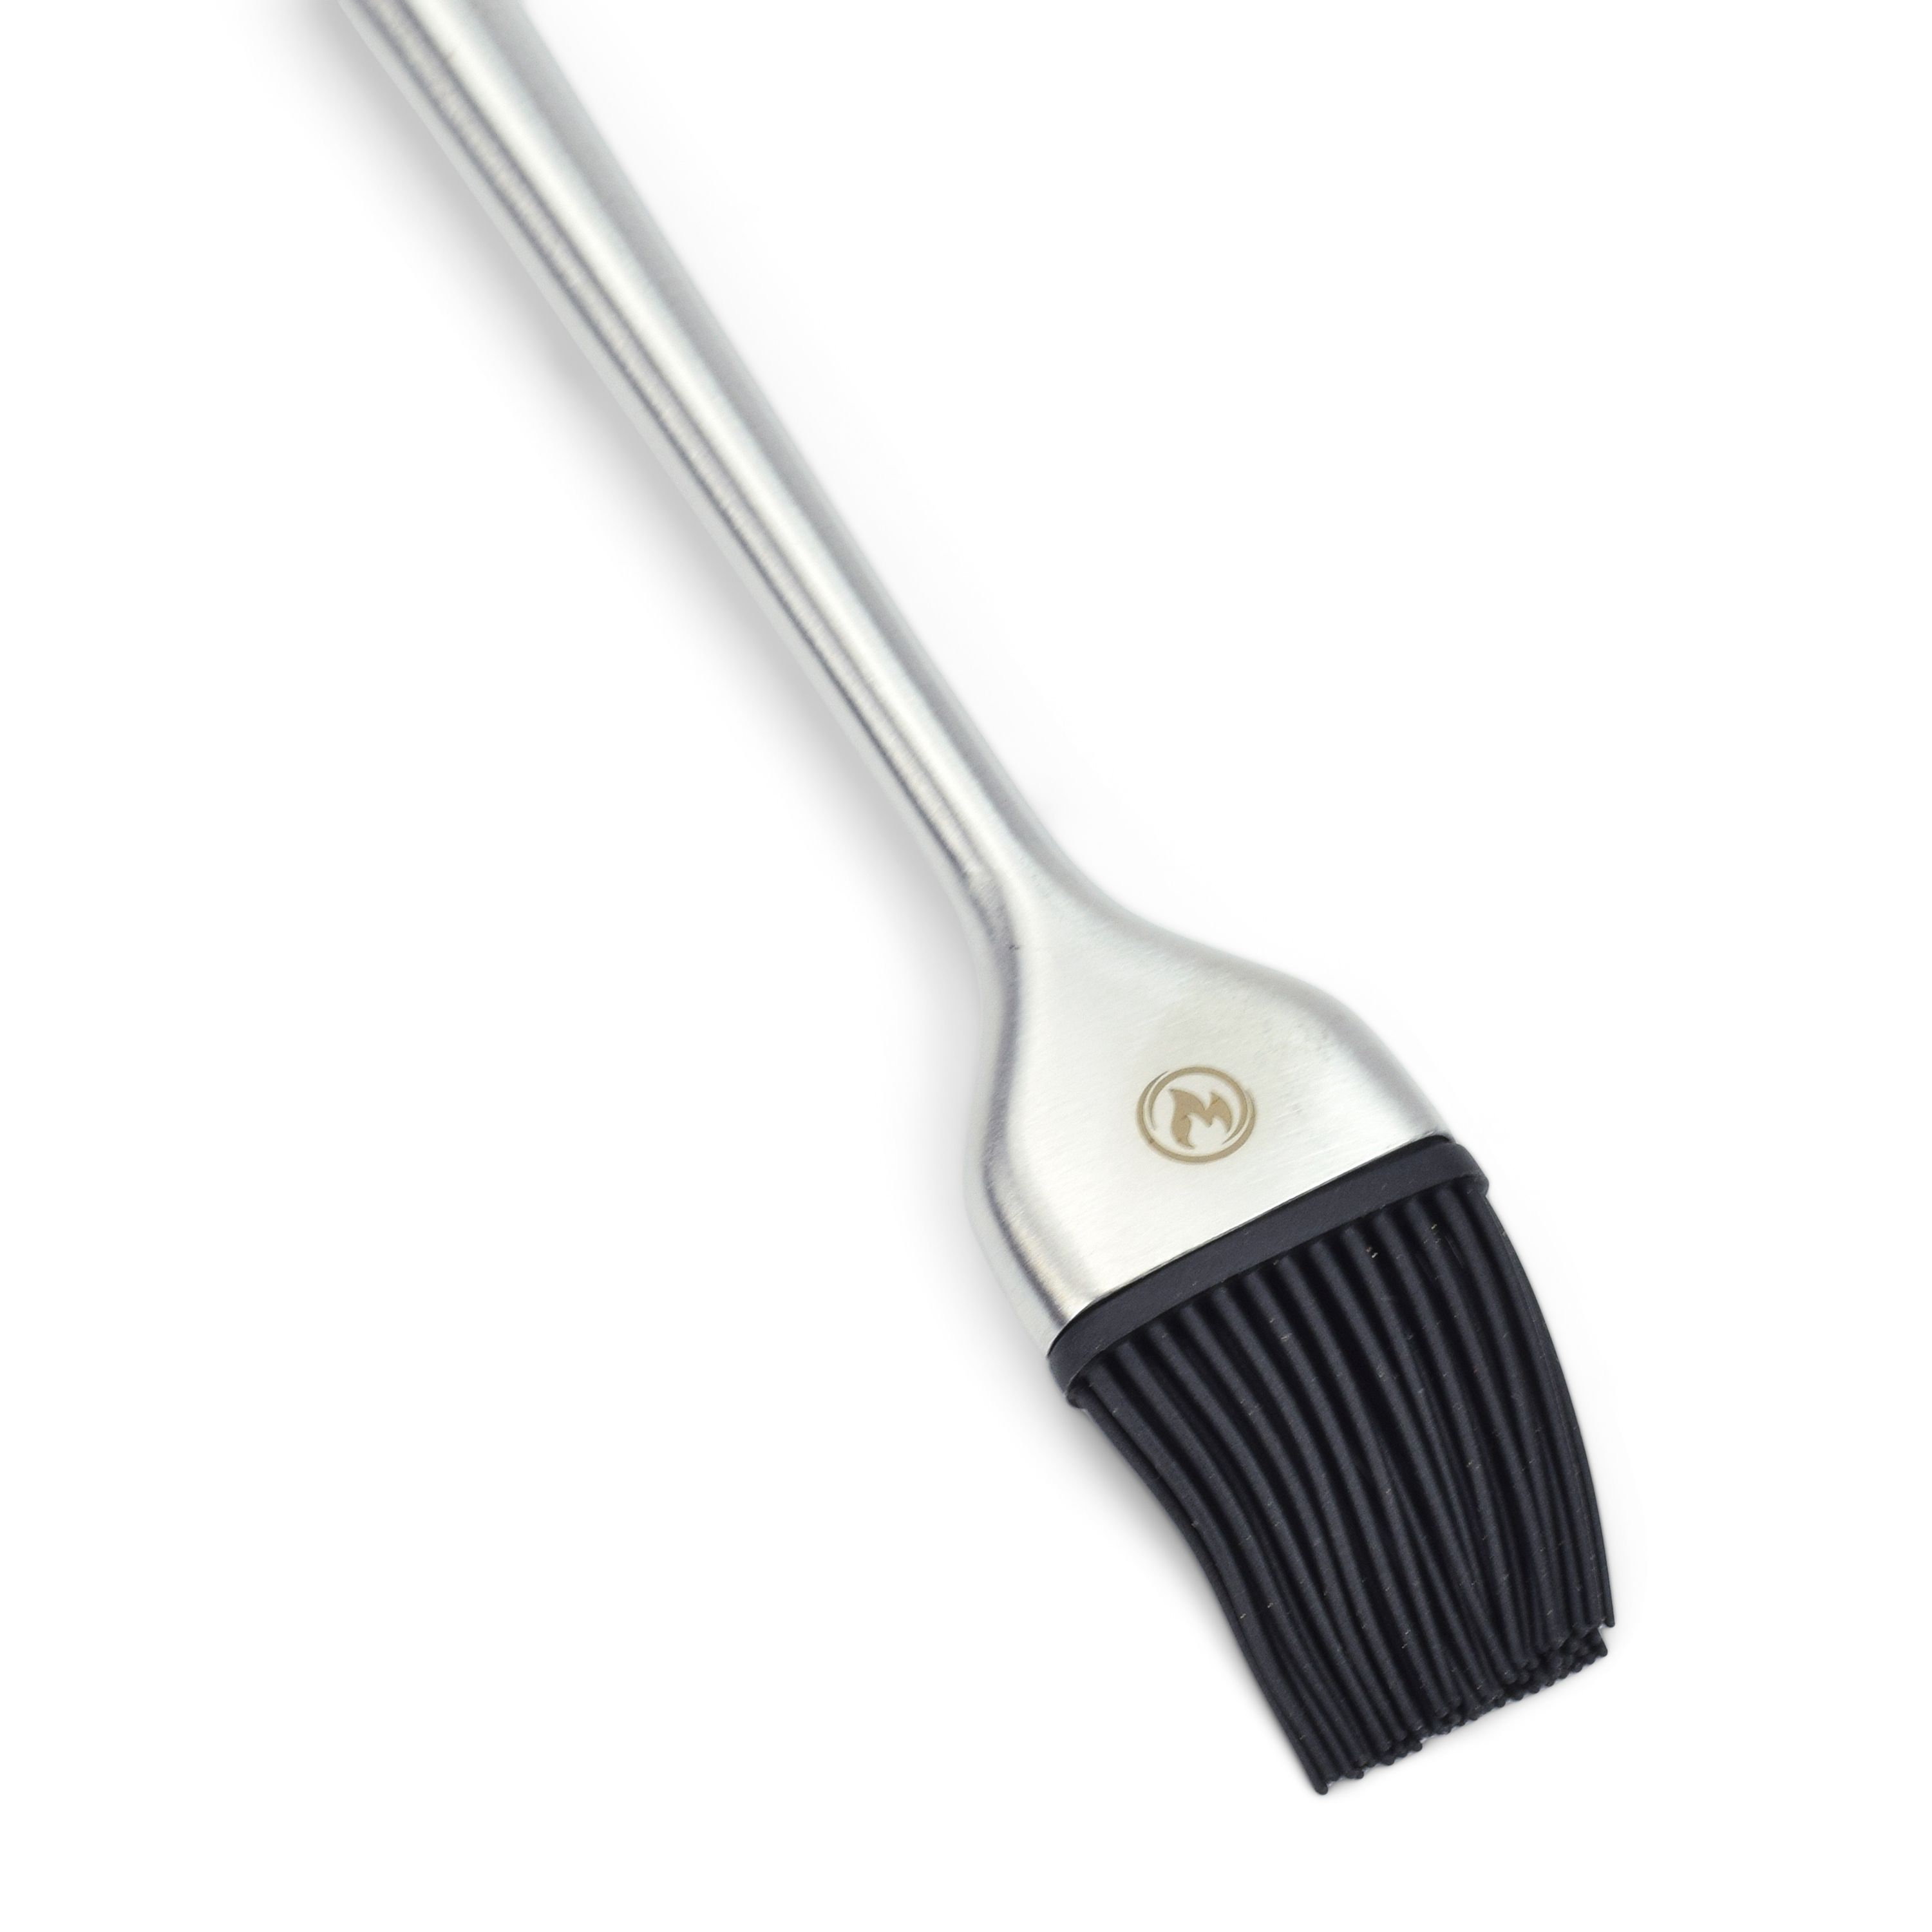 Stainless steel barbecue brush with removable silicone bristles